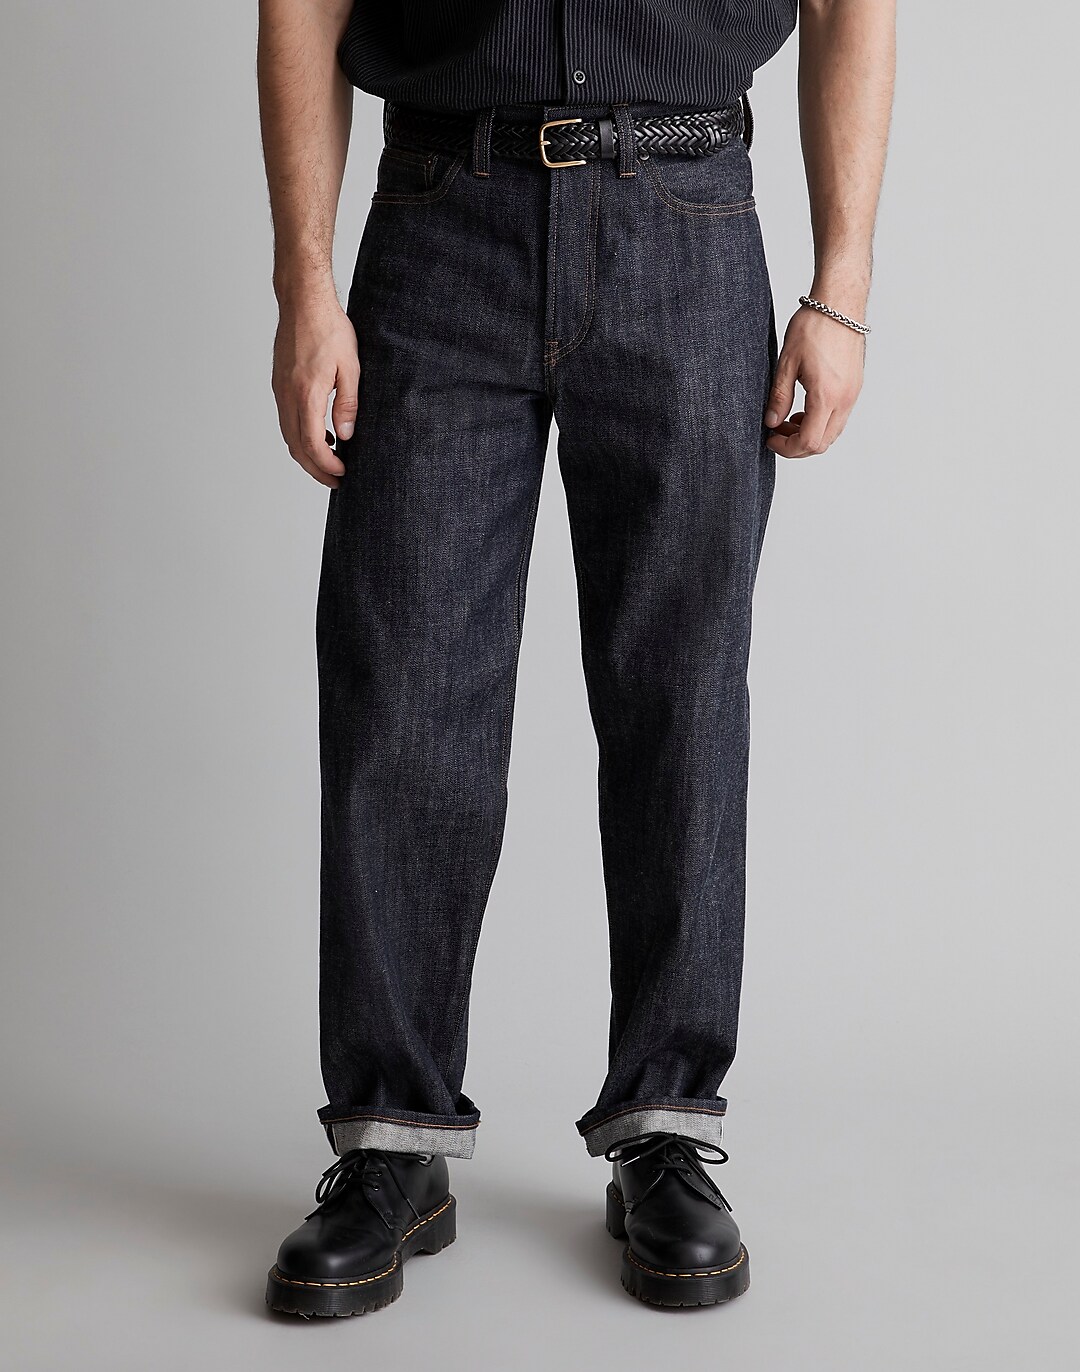 Vintage Relaxed Straight Jeans in Raw Indigo Wash